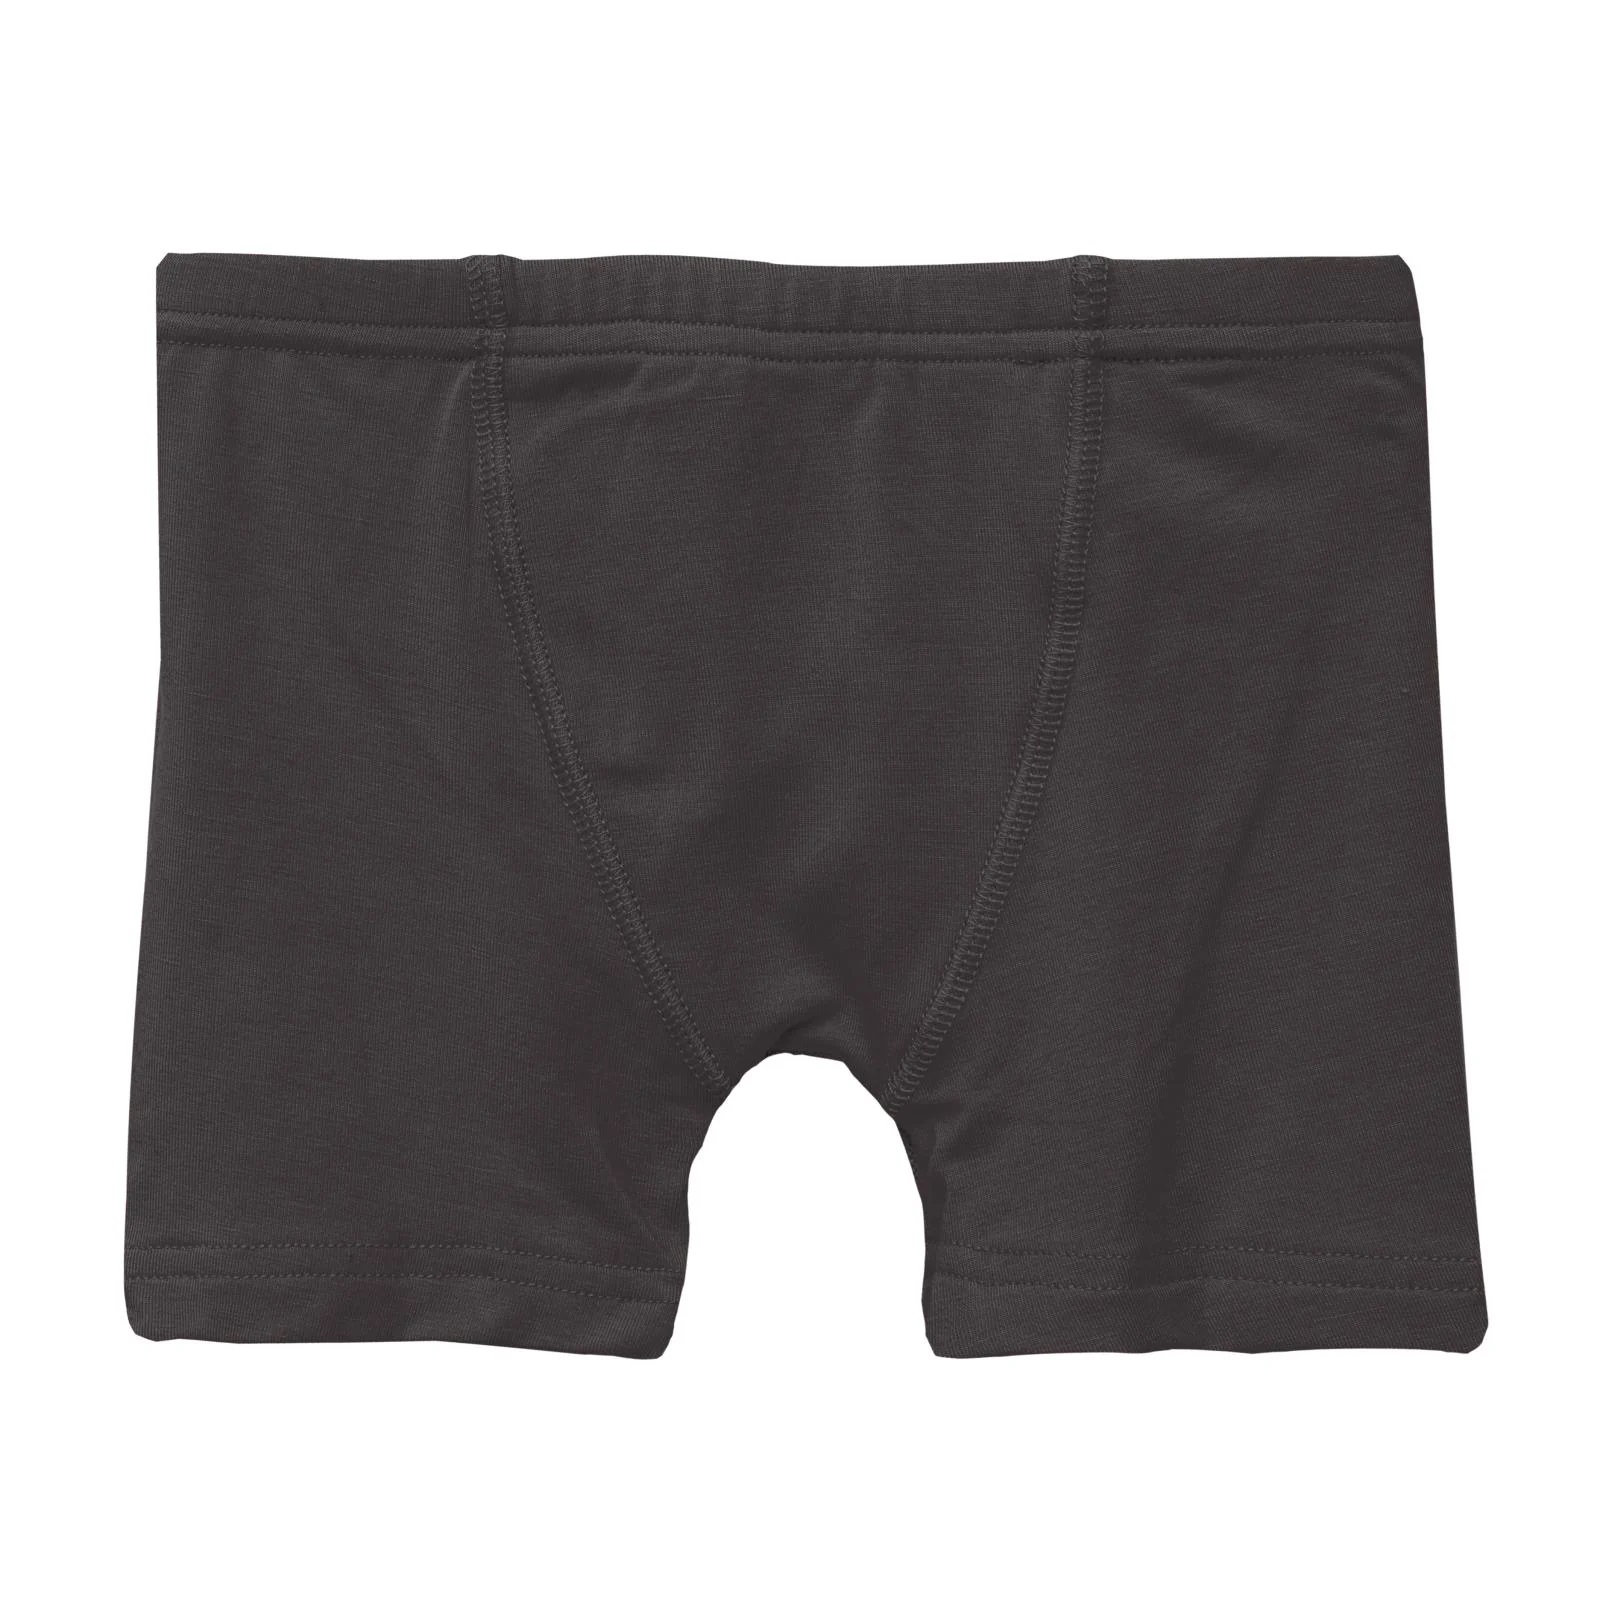 Midnight boys bamboo boxer brief - 8-10 years 1